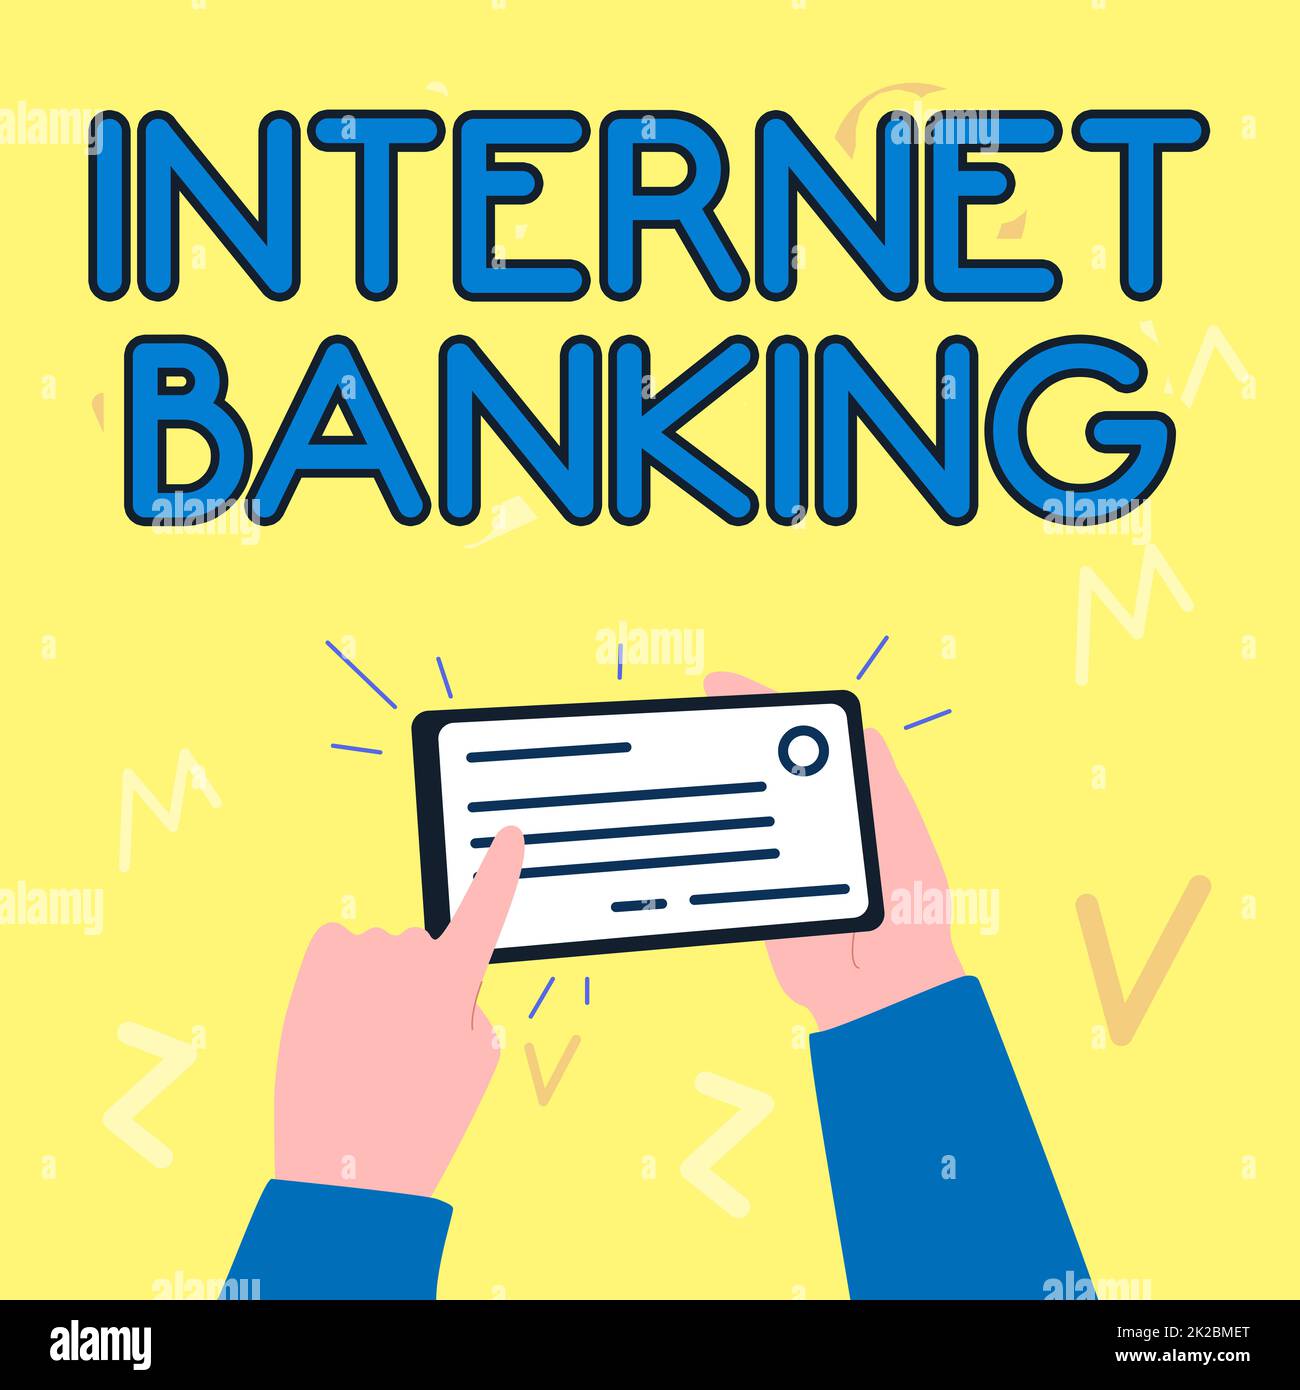 Conceptual caption Internet Banking. Internet Concept banking method which transactions conducted electronically Illustration Of Hand Holding Important Identification Card Pointing It. Stock Photo